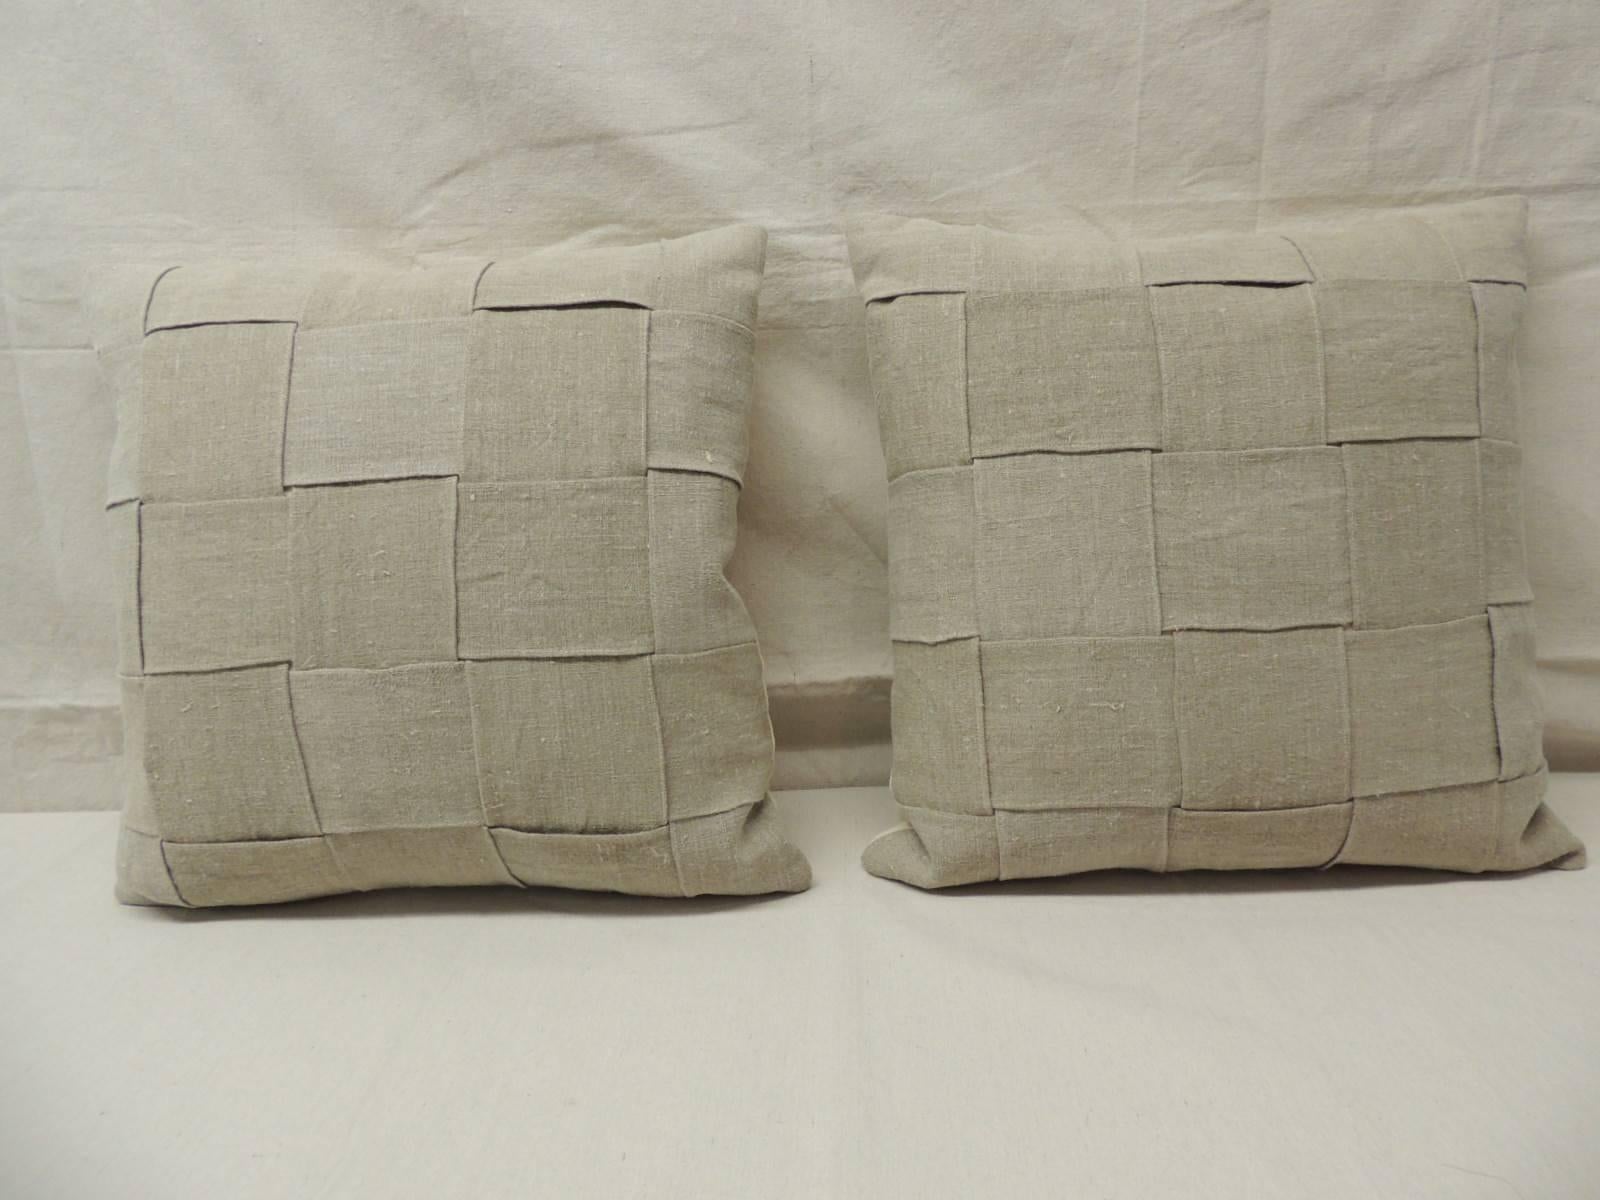 Pair of 19th century homespun French textured linen decorative pillows in oatmeal and natural.   
Exclusive Atelier Lam basket weave design. 19th century homespun decorative French pillows finished with natural linen in the backings.  Homespun